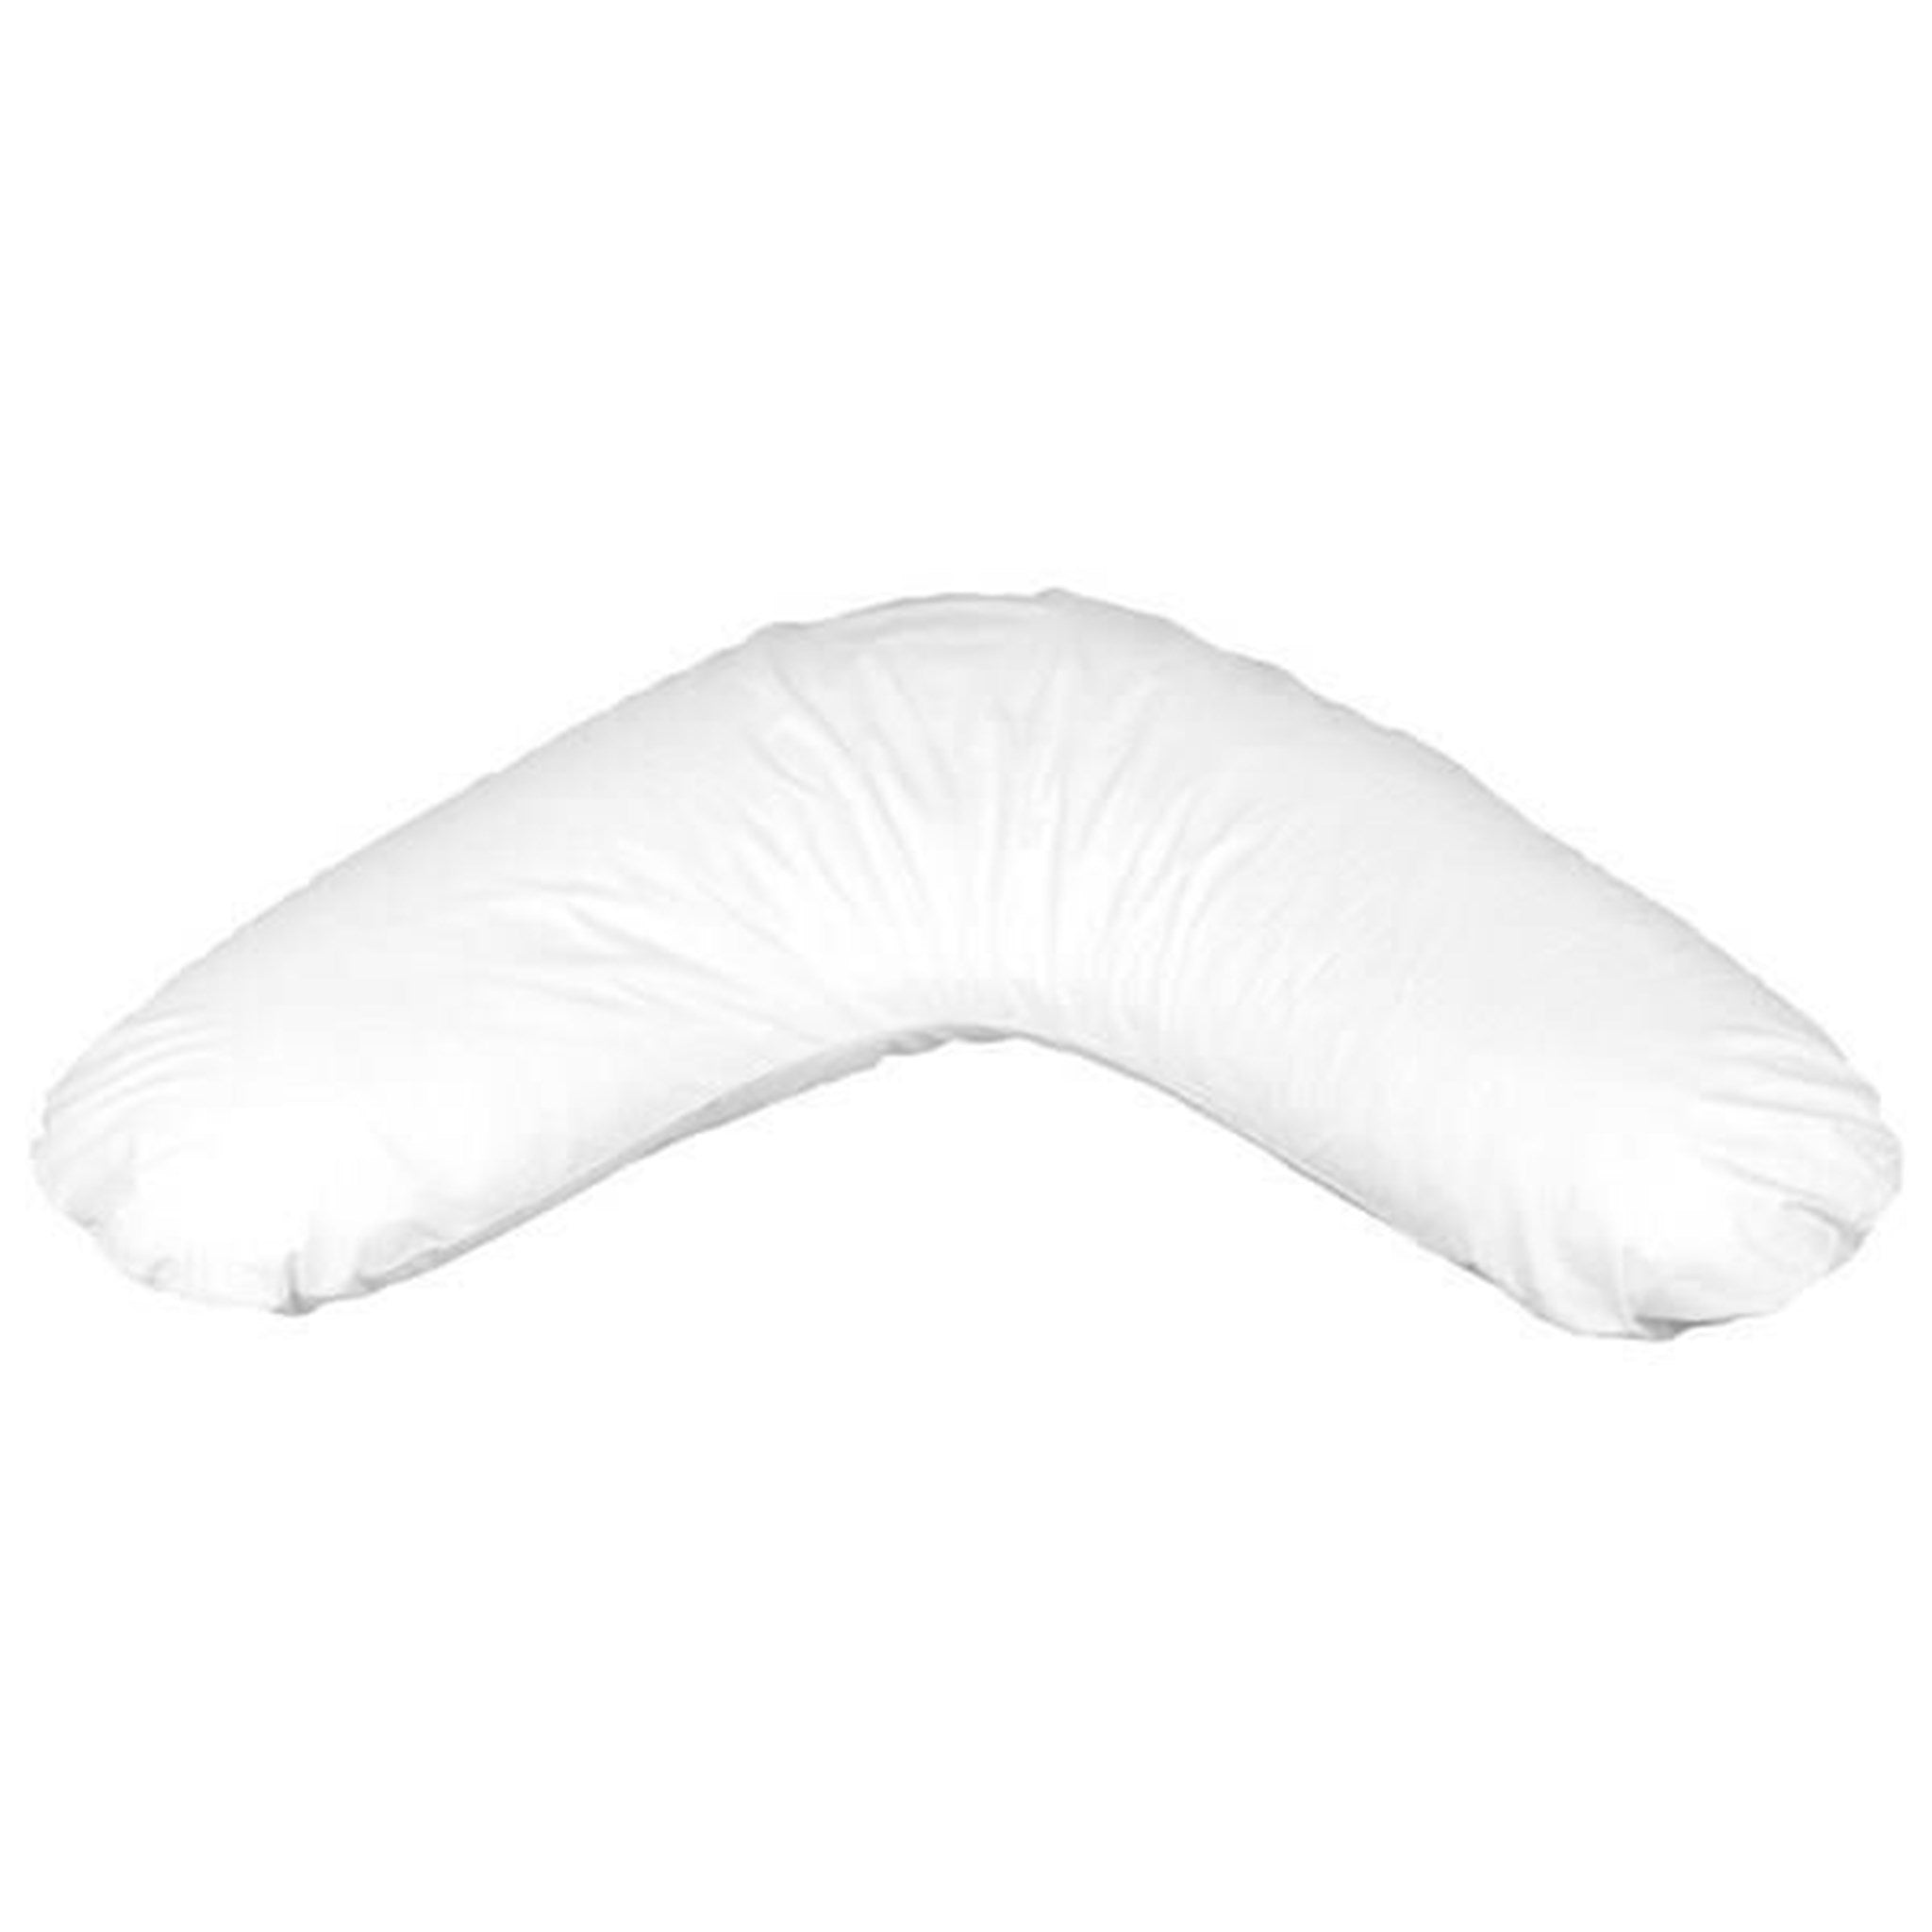 Fossflakes Nursing Pillow (without pillow cover)